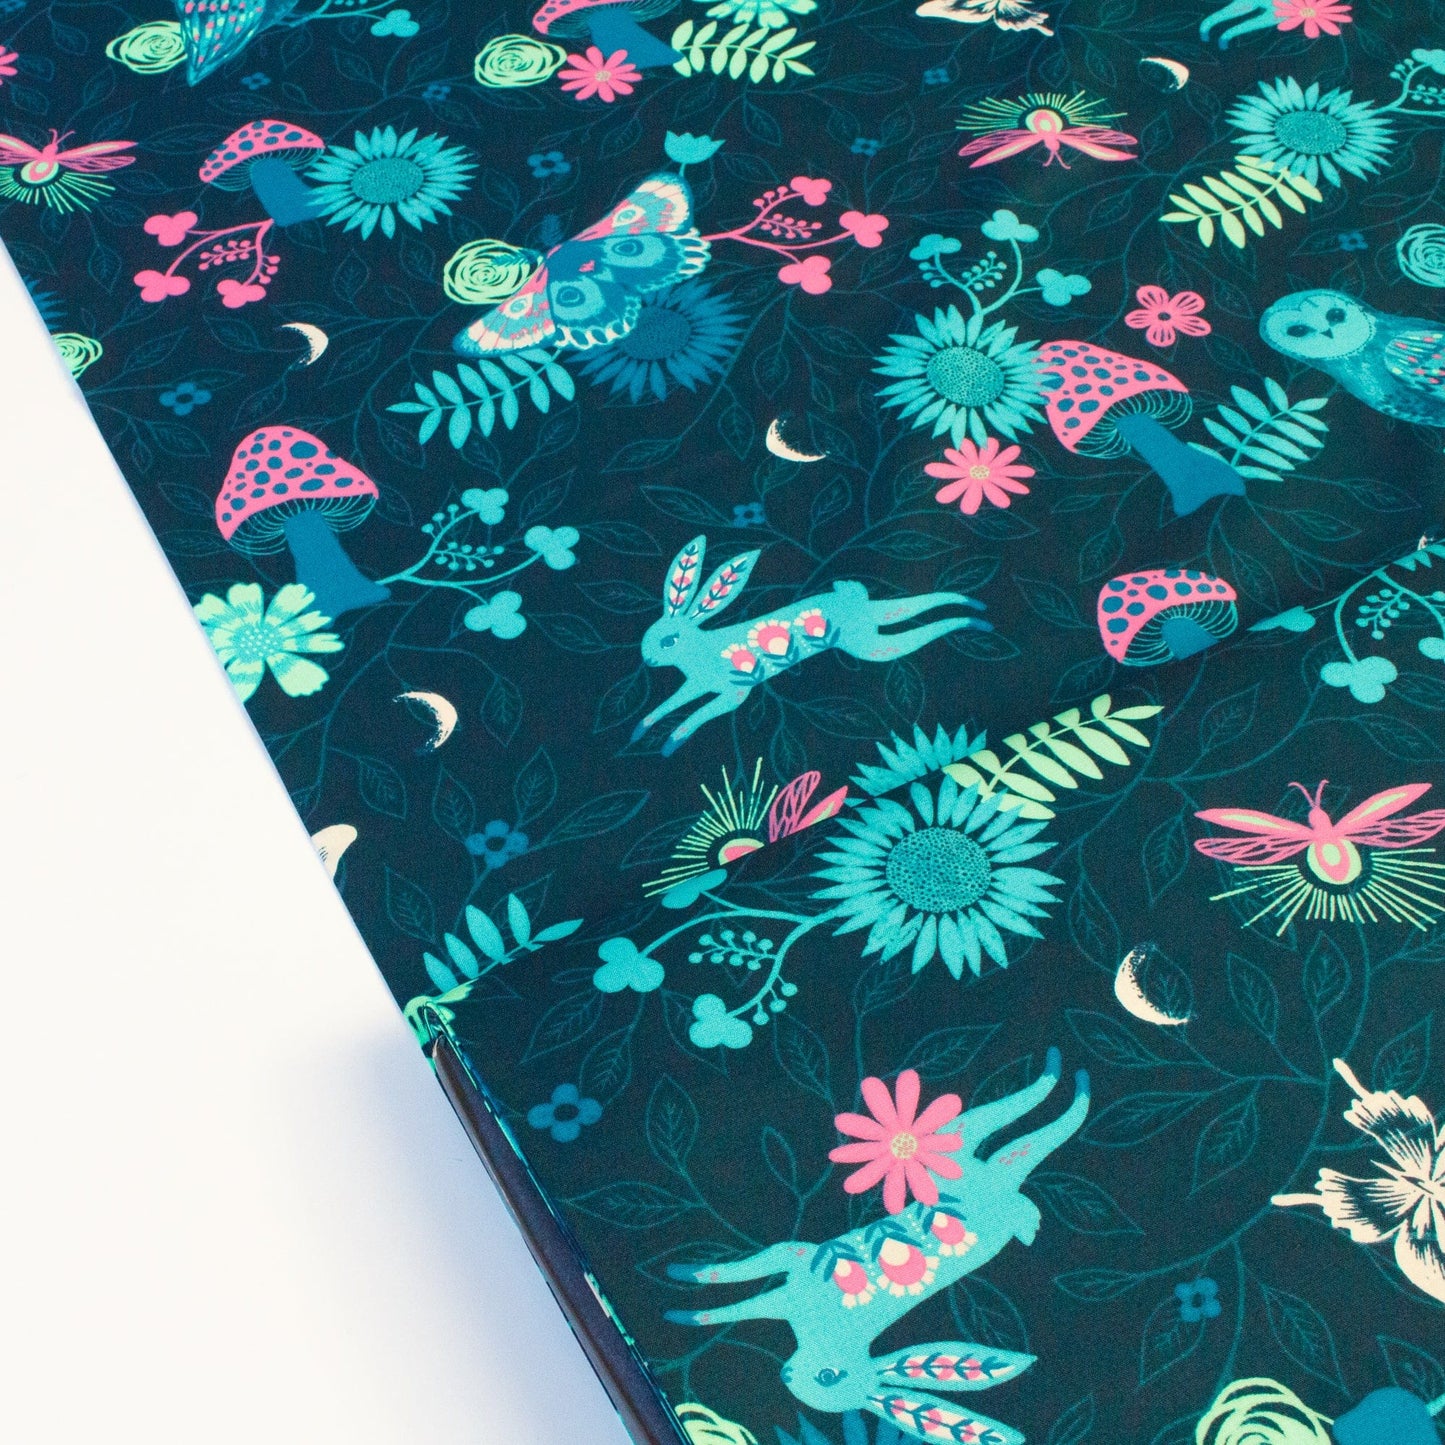 Ruby Star Society 'Firefly' Quilting Cotton 'Twilight' in Dark Teal